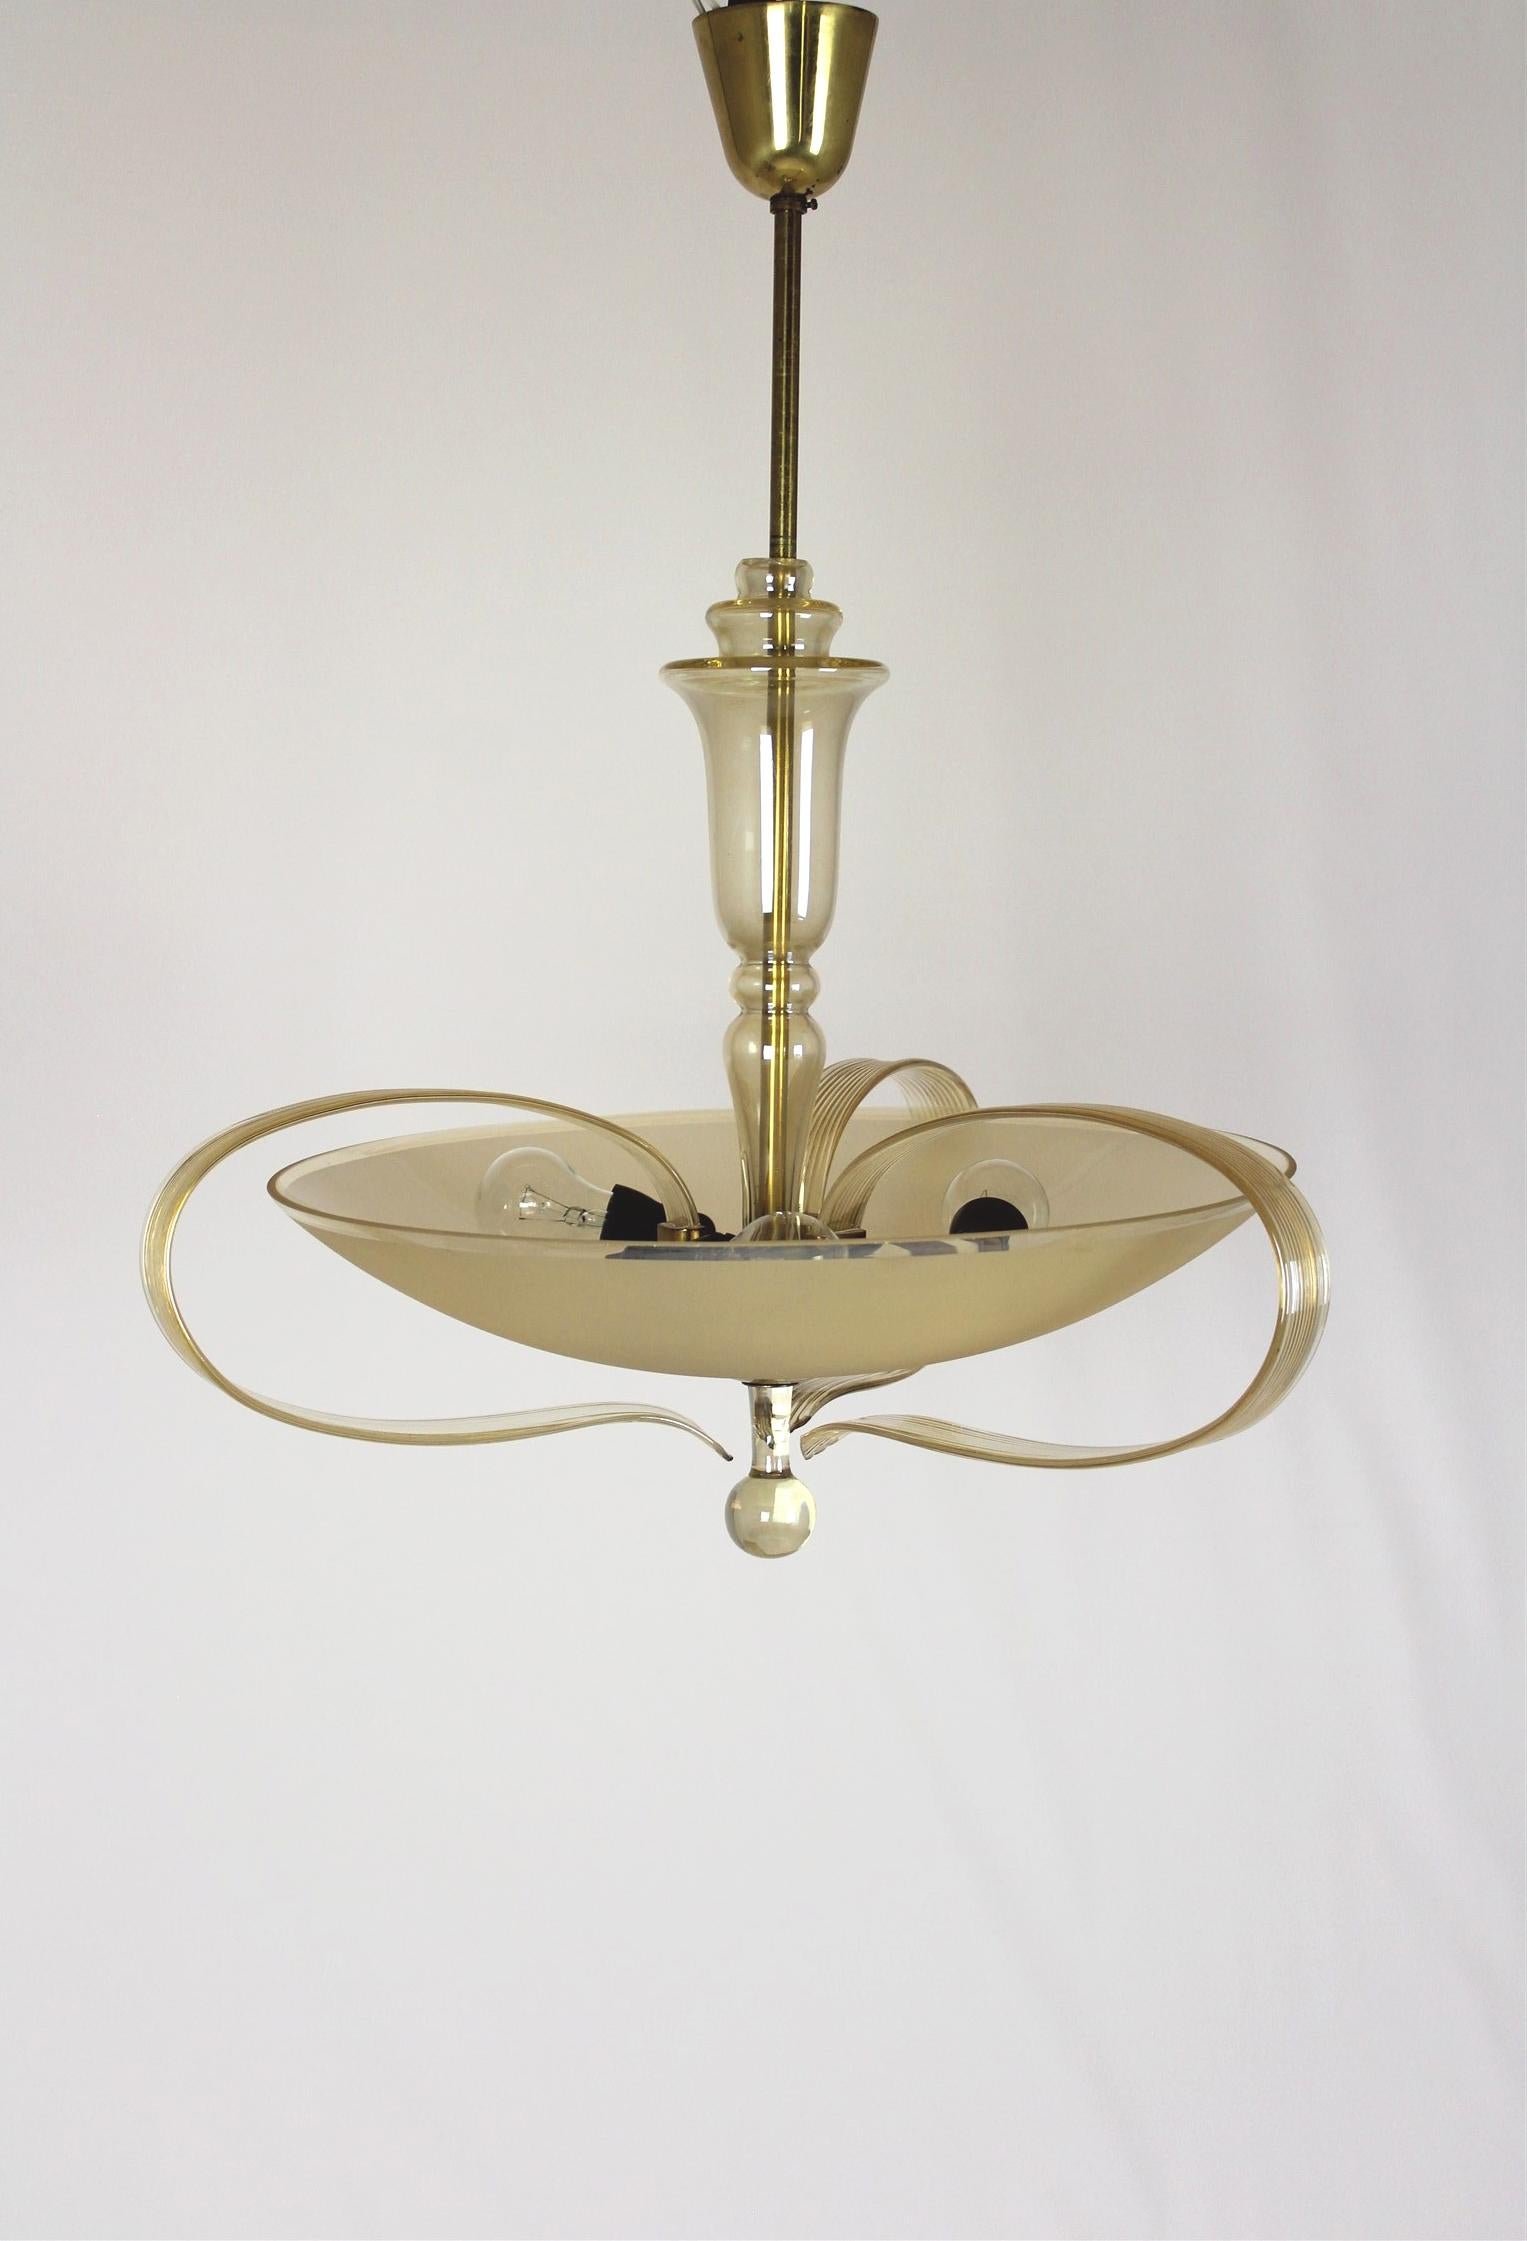 Brass and Curved Glass Chandelier from ESC Zukov, 1940s For Sale 9